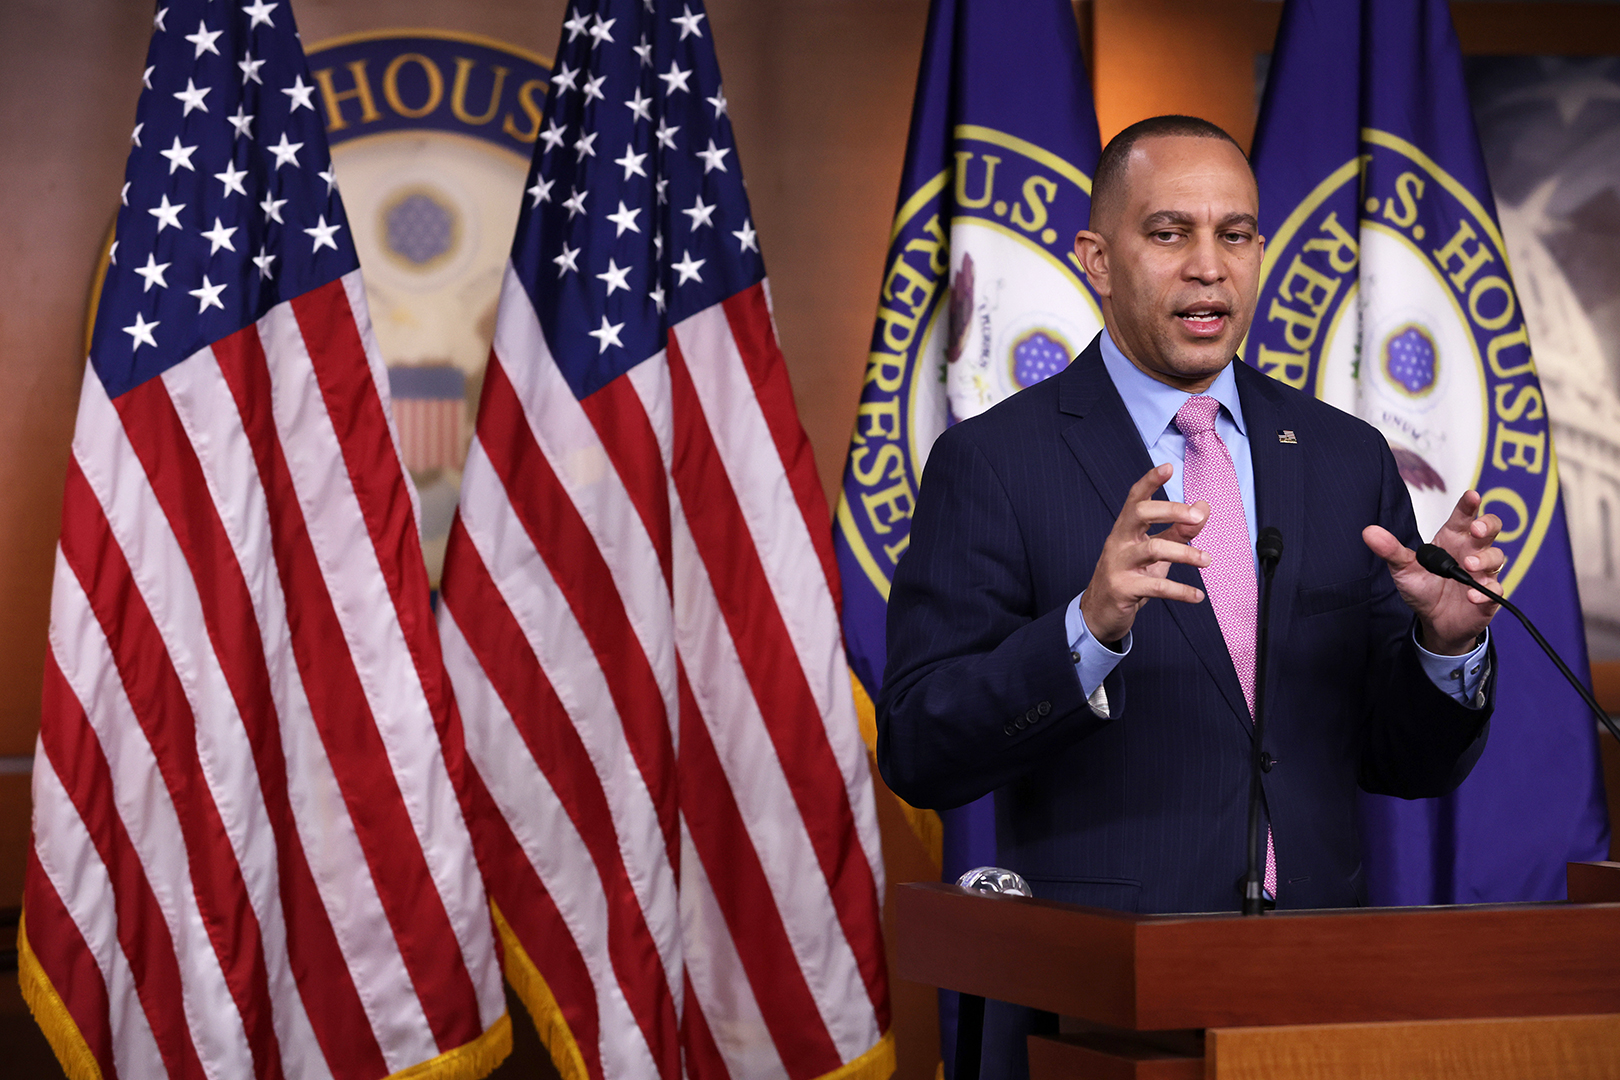 House Minority Leader Rep. Hakeem Jeffries speaks during a weekly news conference at the Capitol on March 30 in Washington, DC.